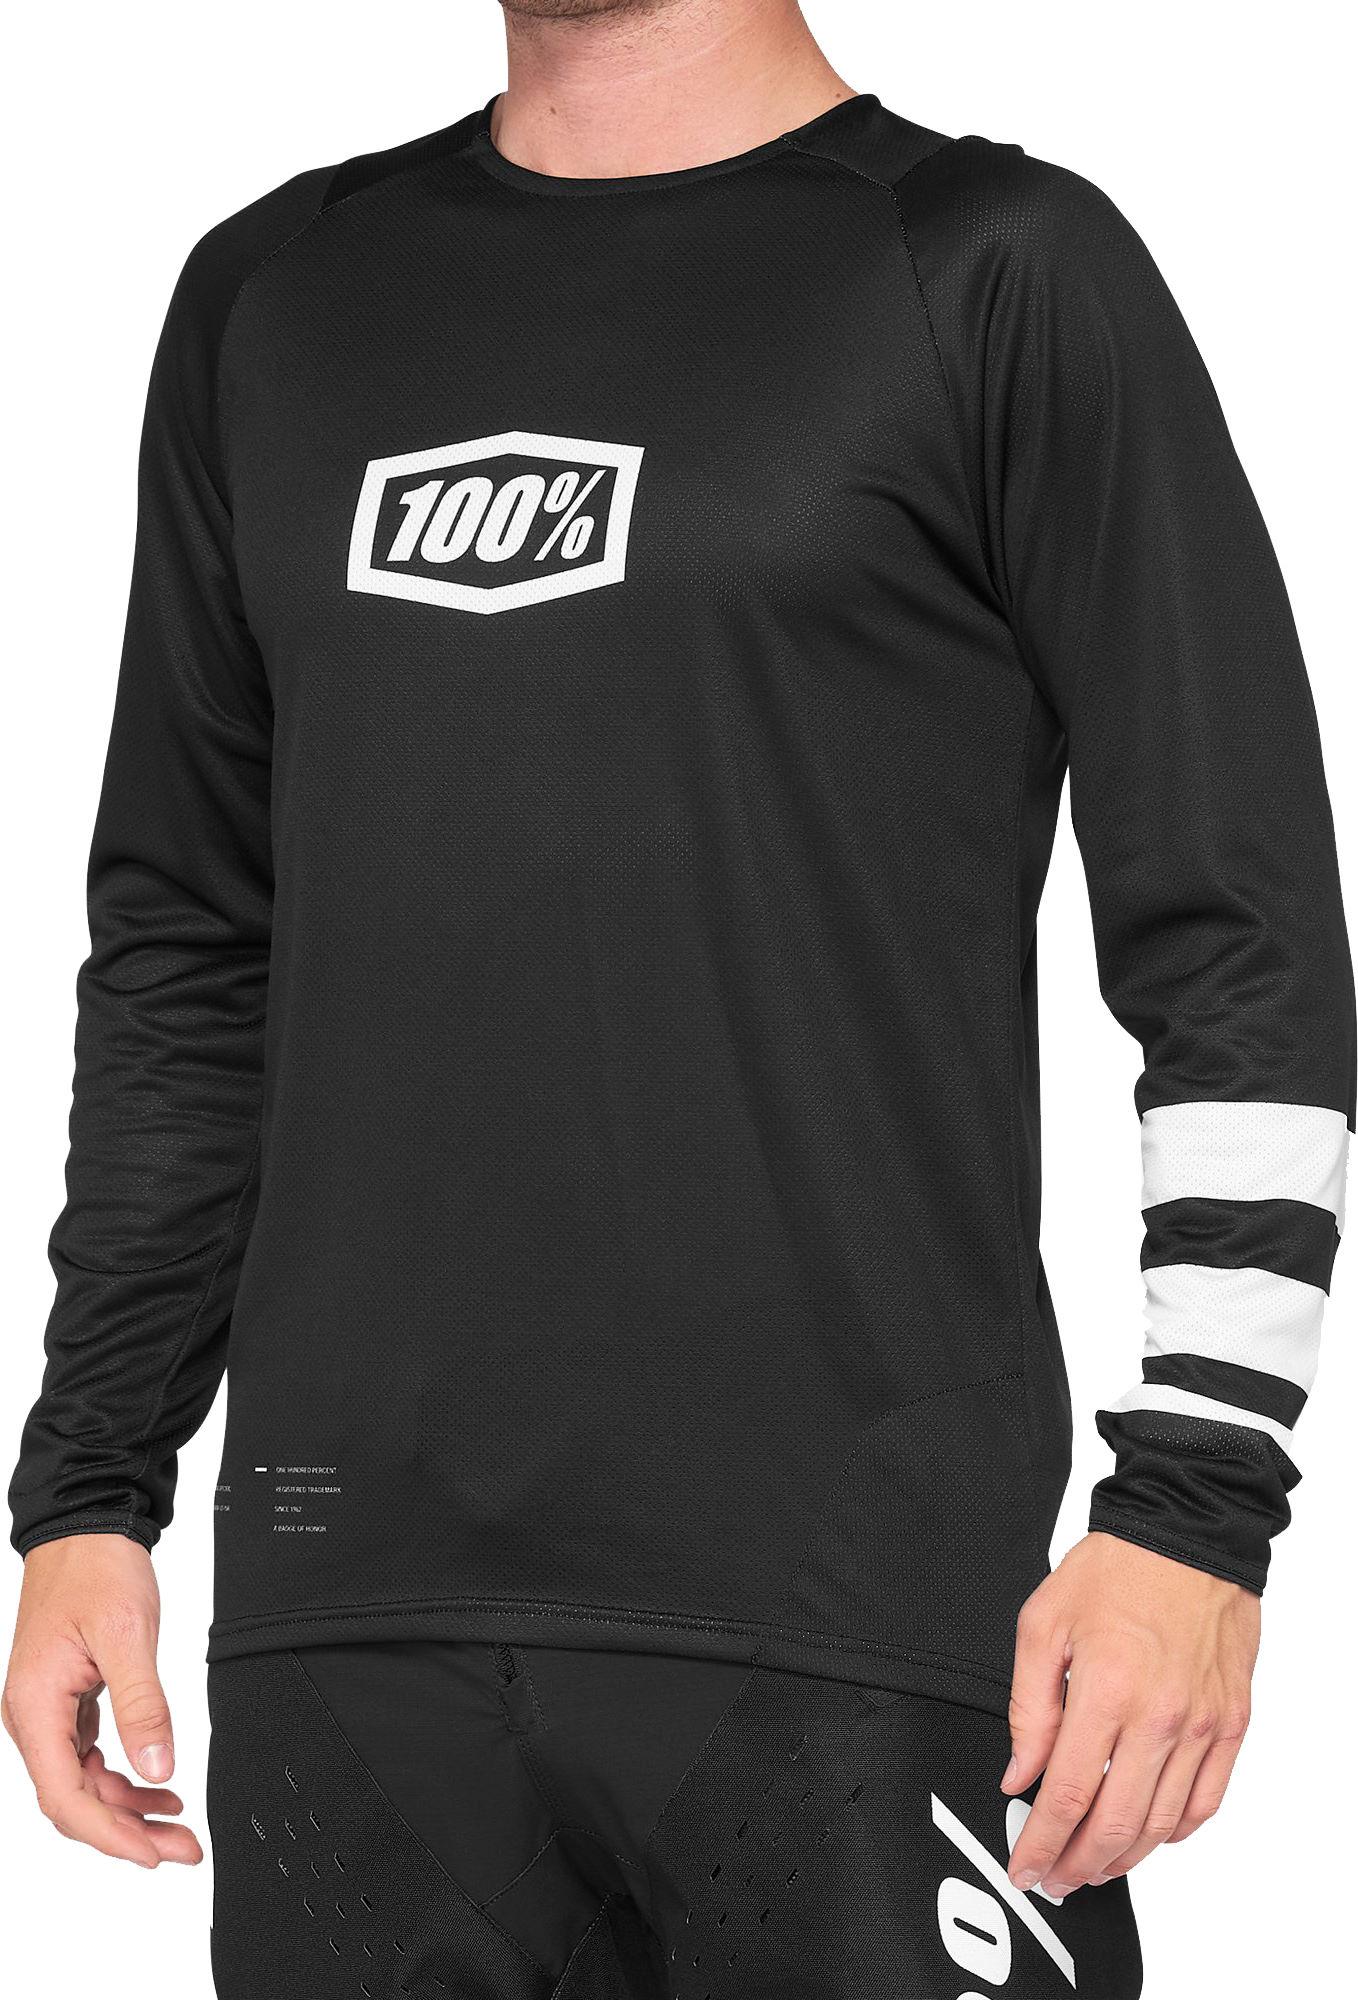 100% R-core Youth Jersey - Black/white